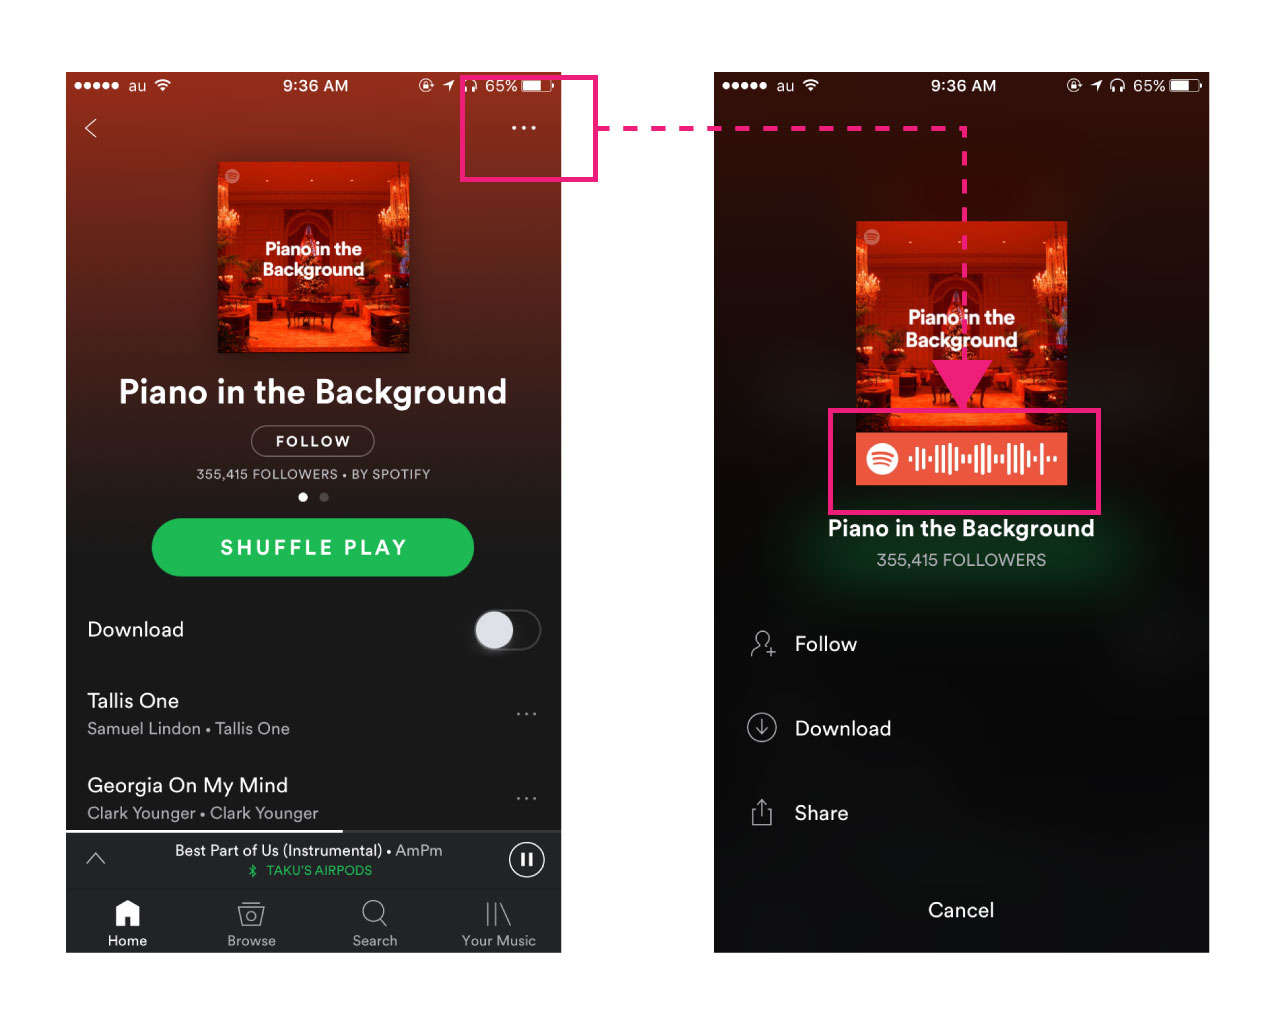 spotify-share-say-hello-to-spotify-codes-4